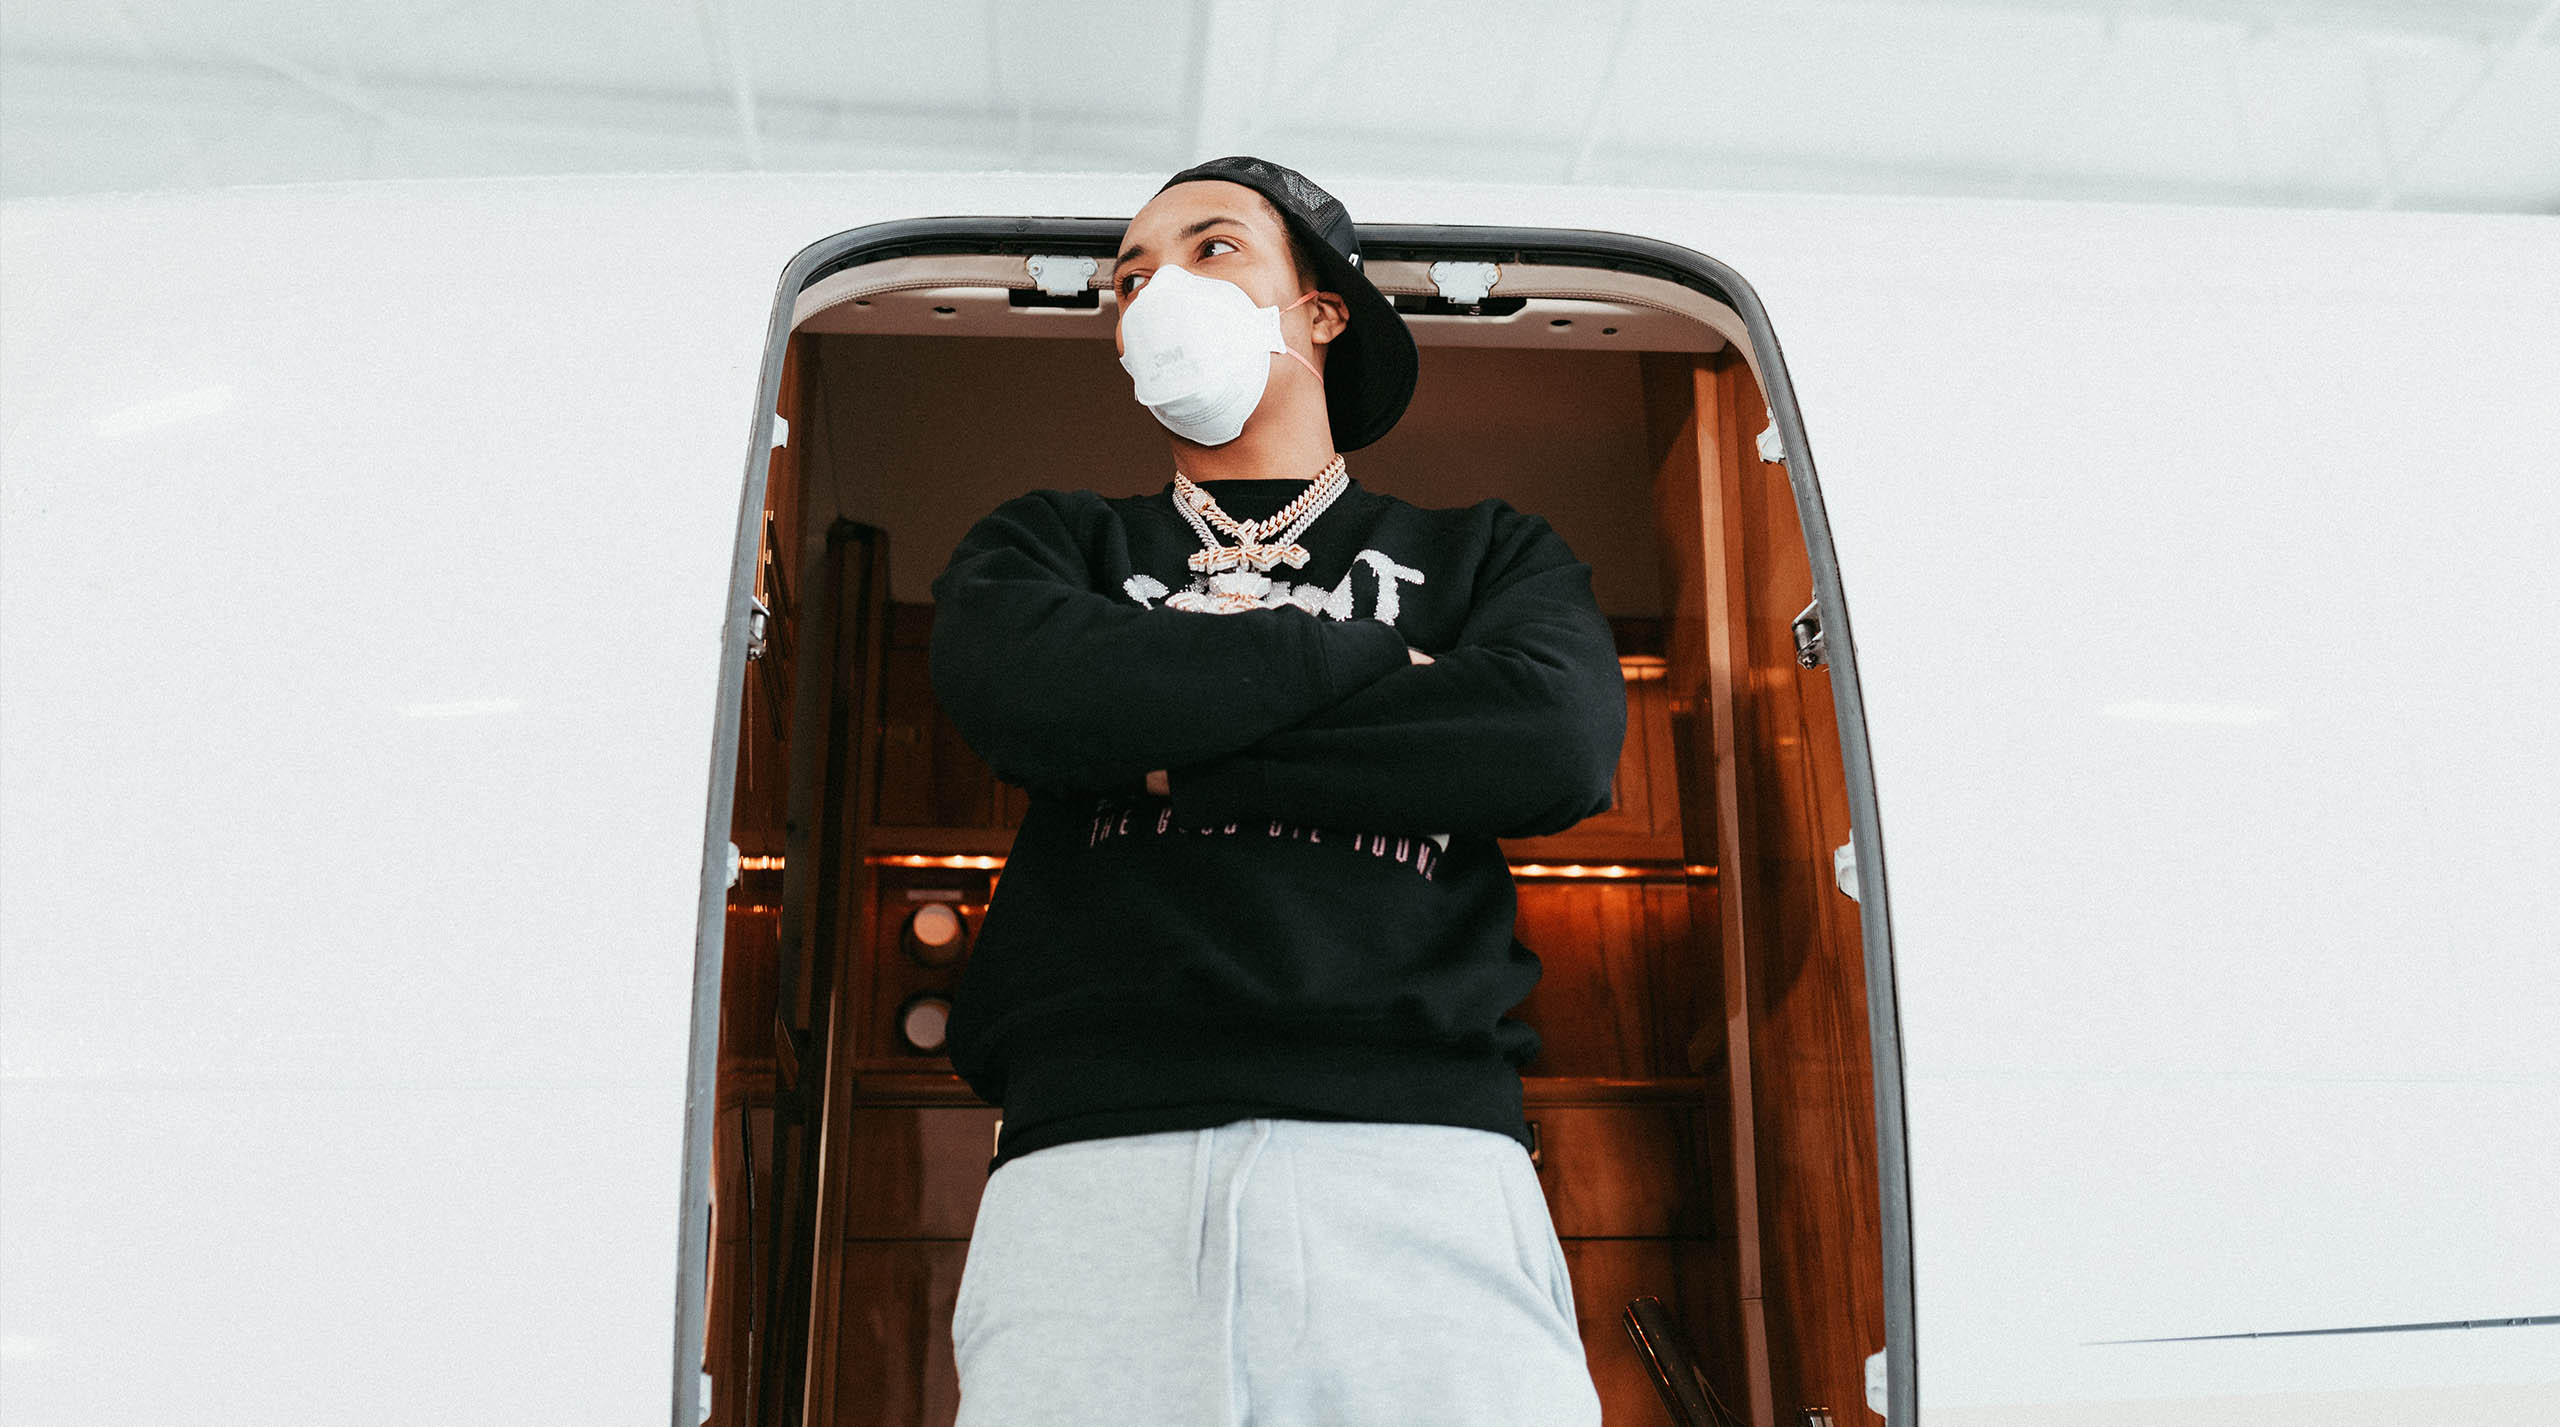 G HERBO DONATES 20,000 MASKS TO COUNTY JAIL